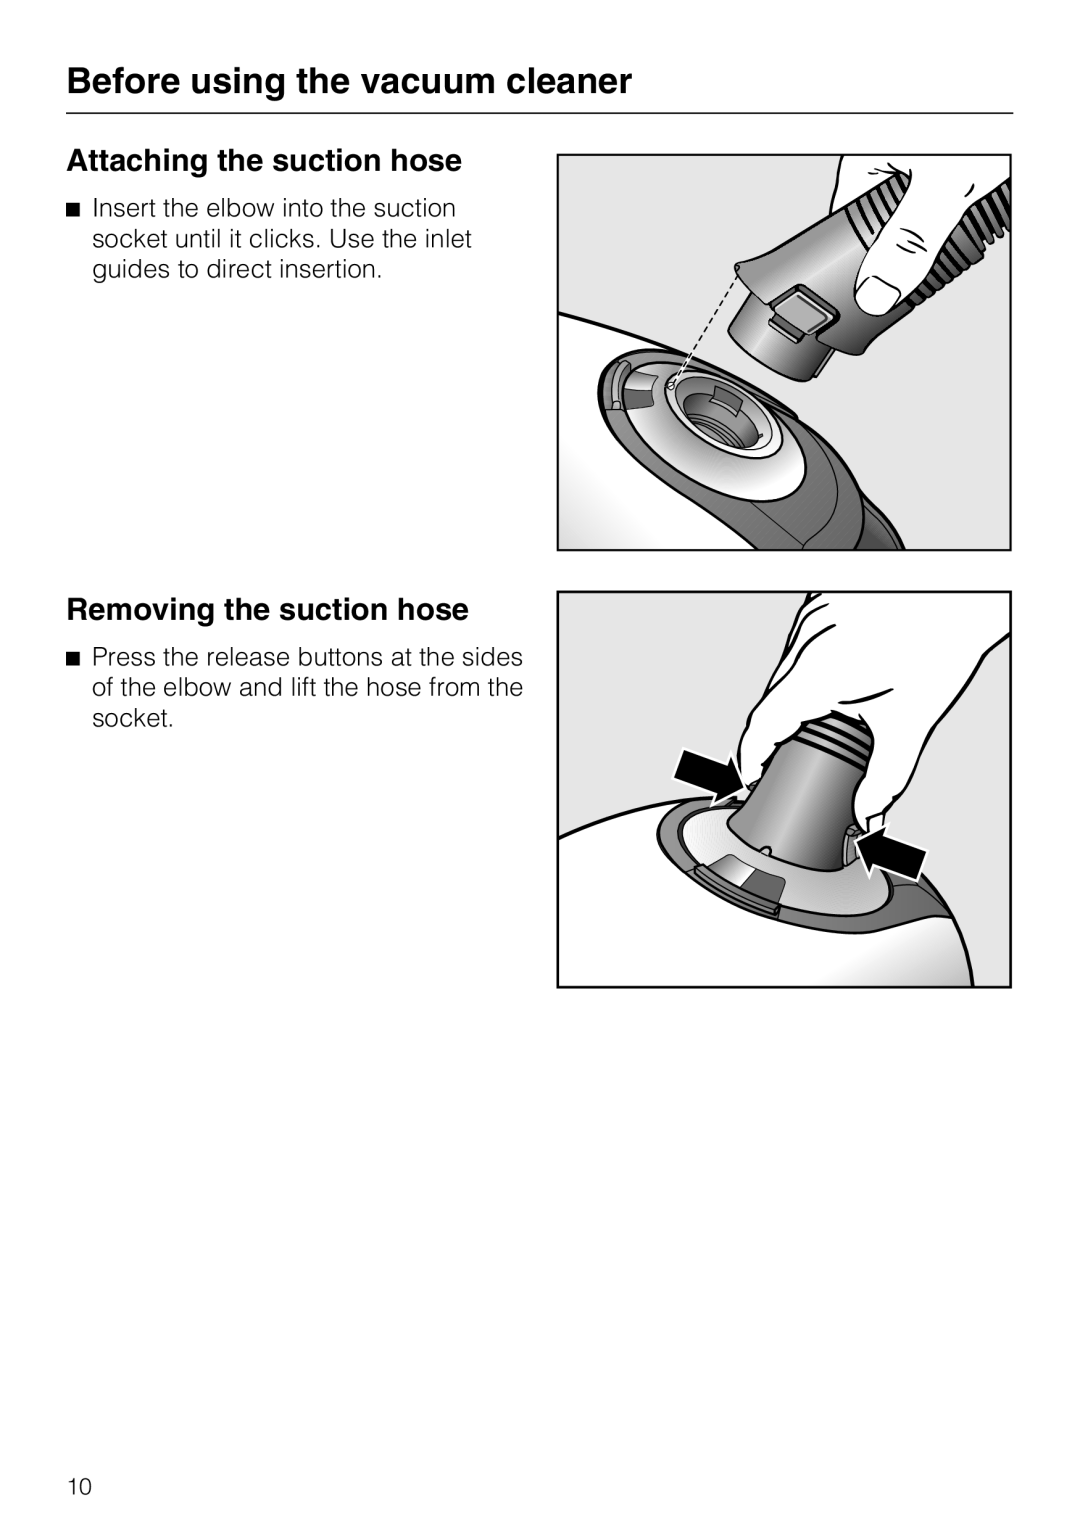 Miele S 5001 manual Before using the vacuum cleaner, Attaching the suction hose, Removing the suction hose 